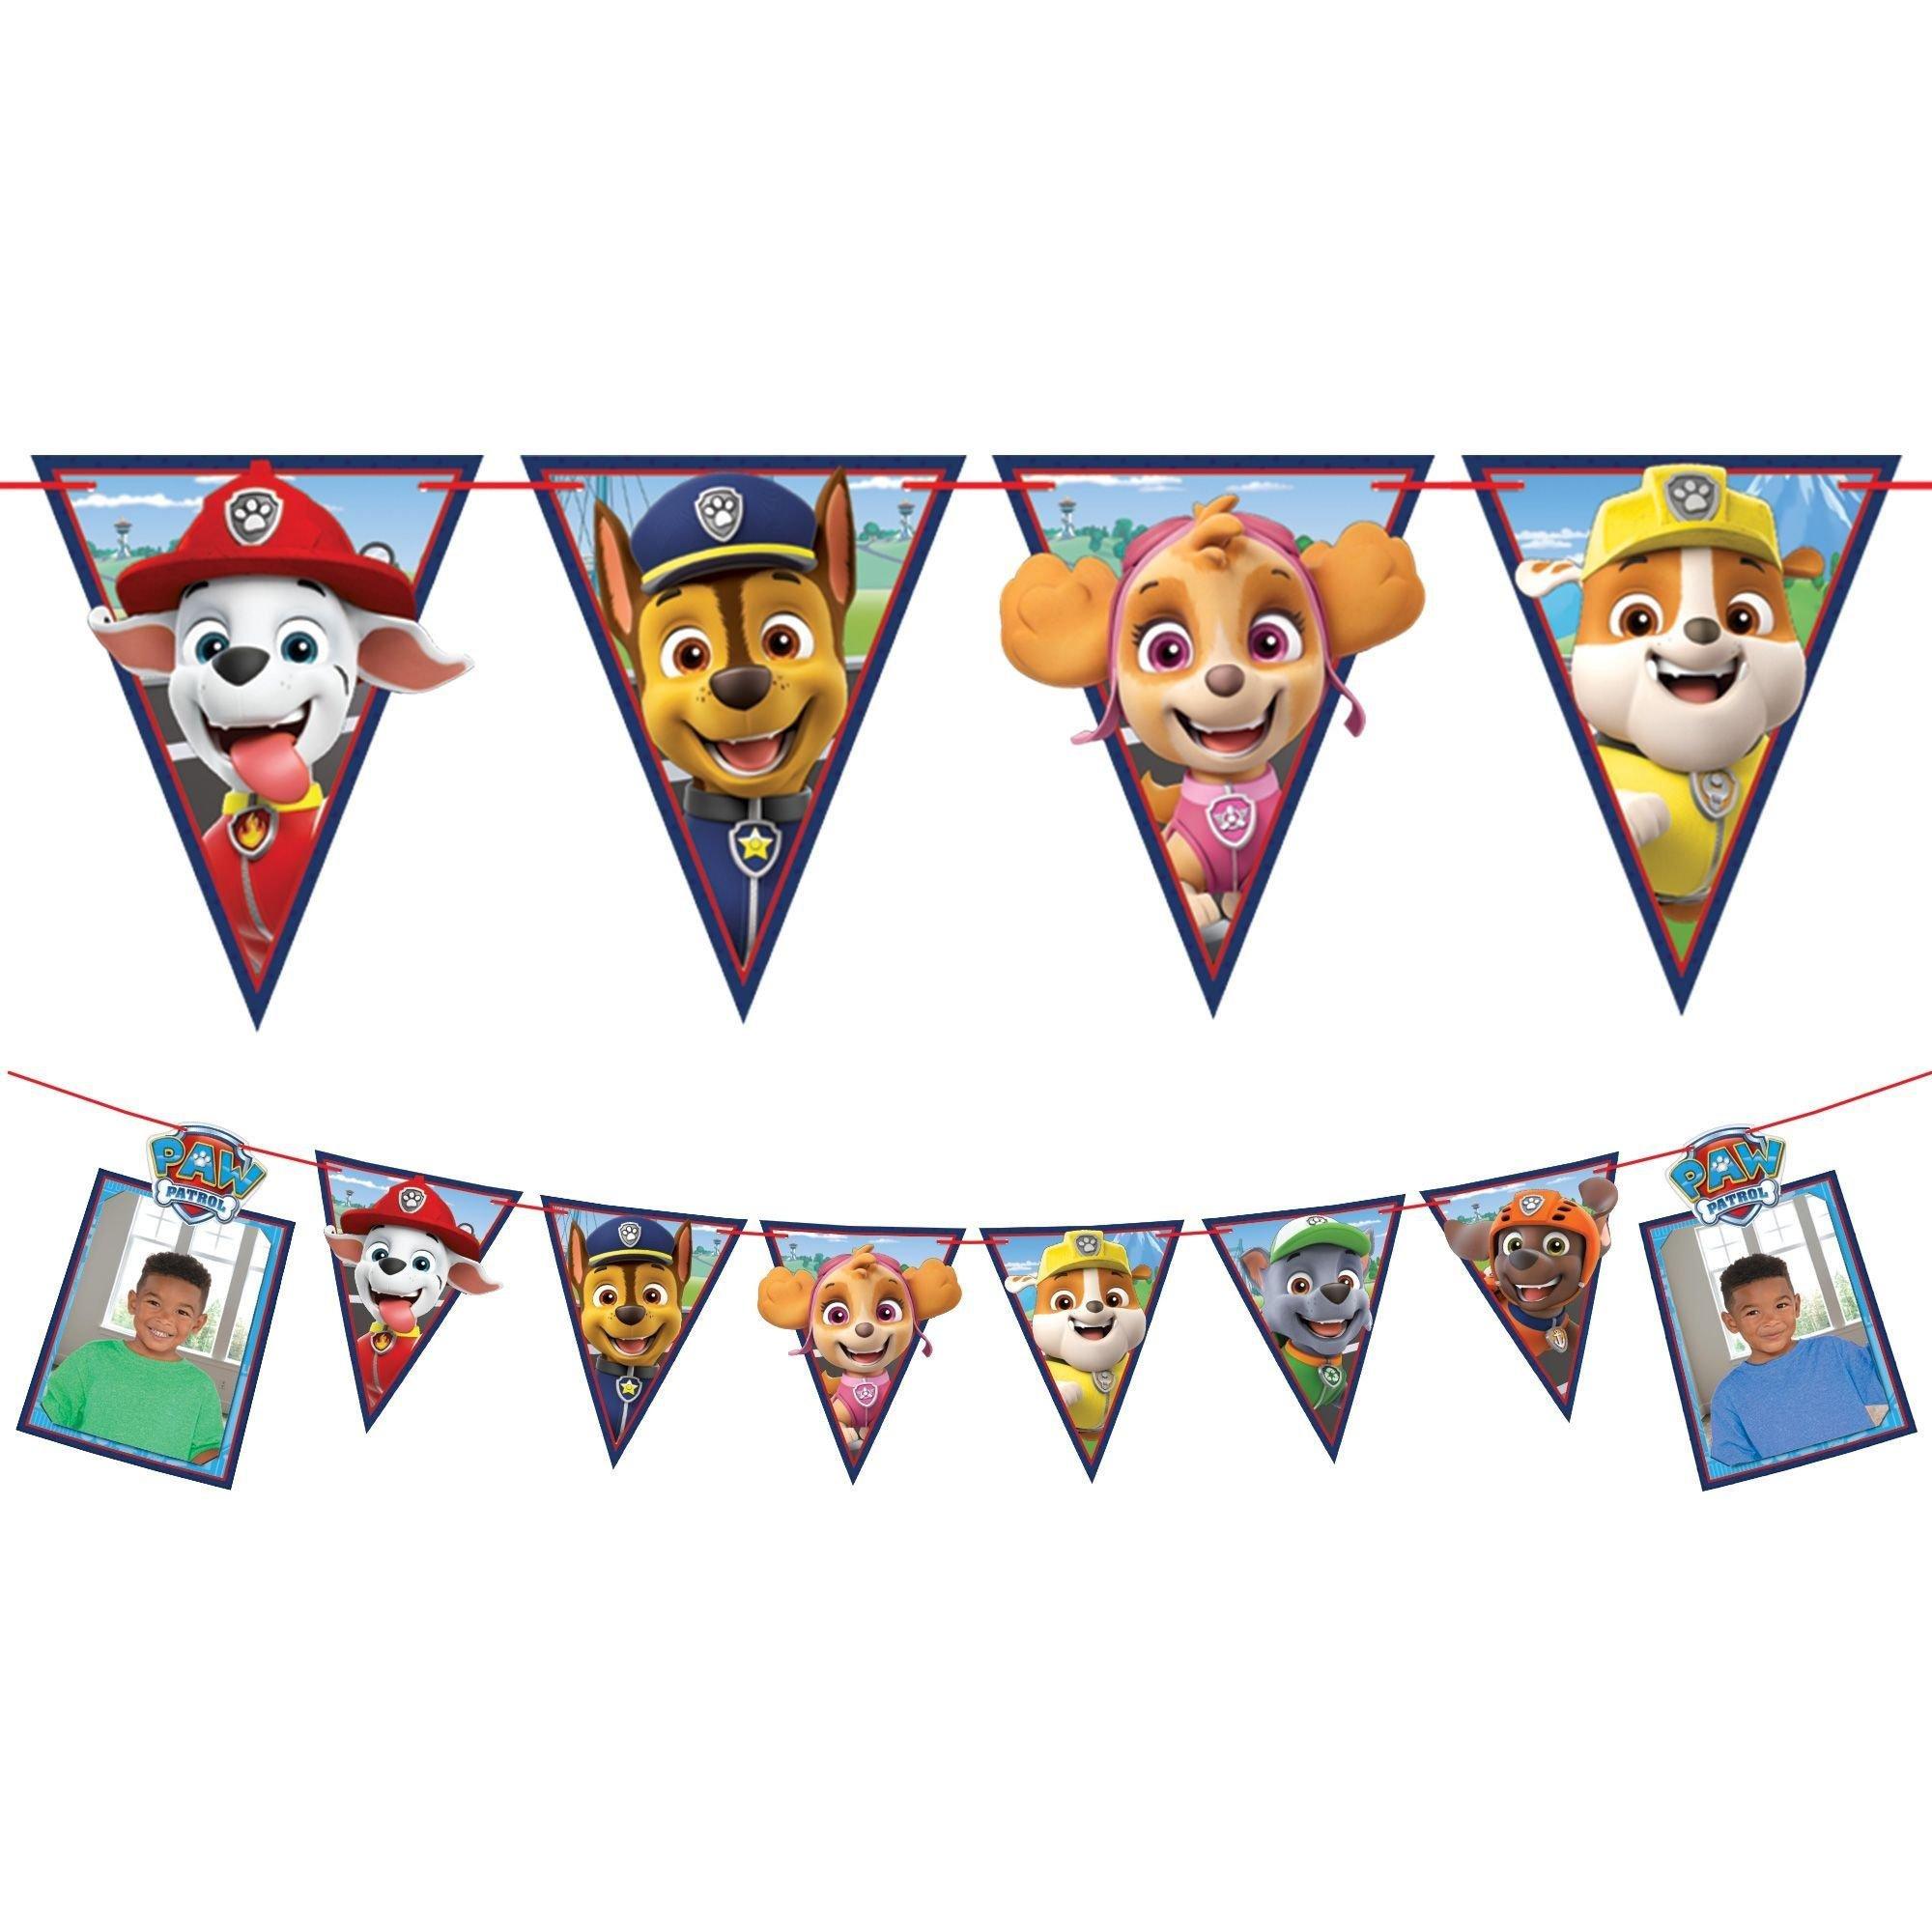 PAW Patrol Party Decorating Supplies Pack - Kit Includes Banner, Swirl Decorations & Centerpiece